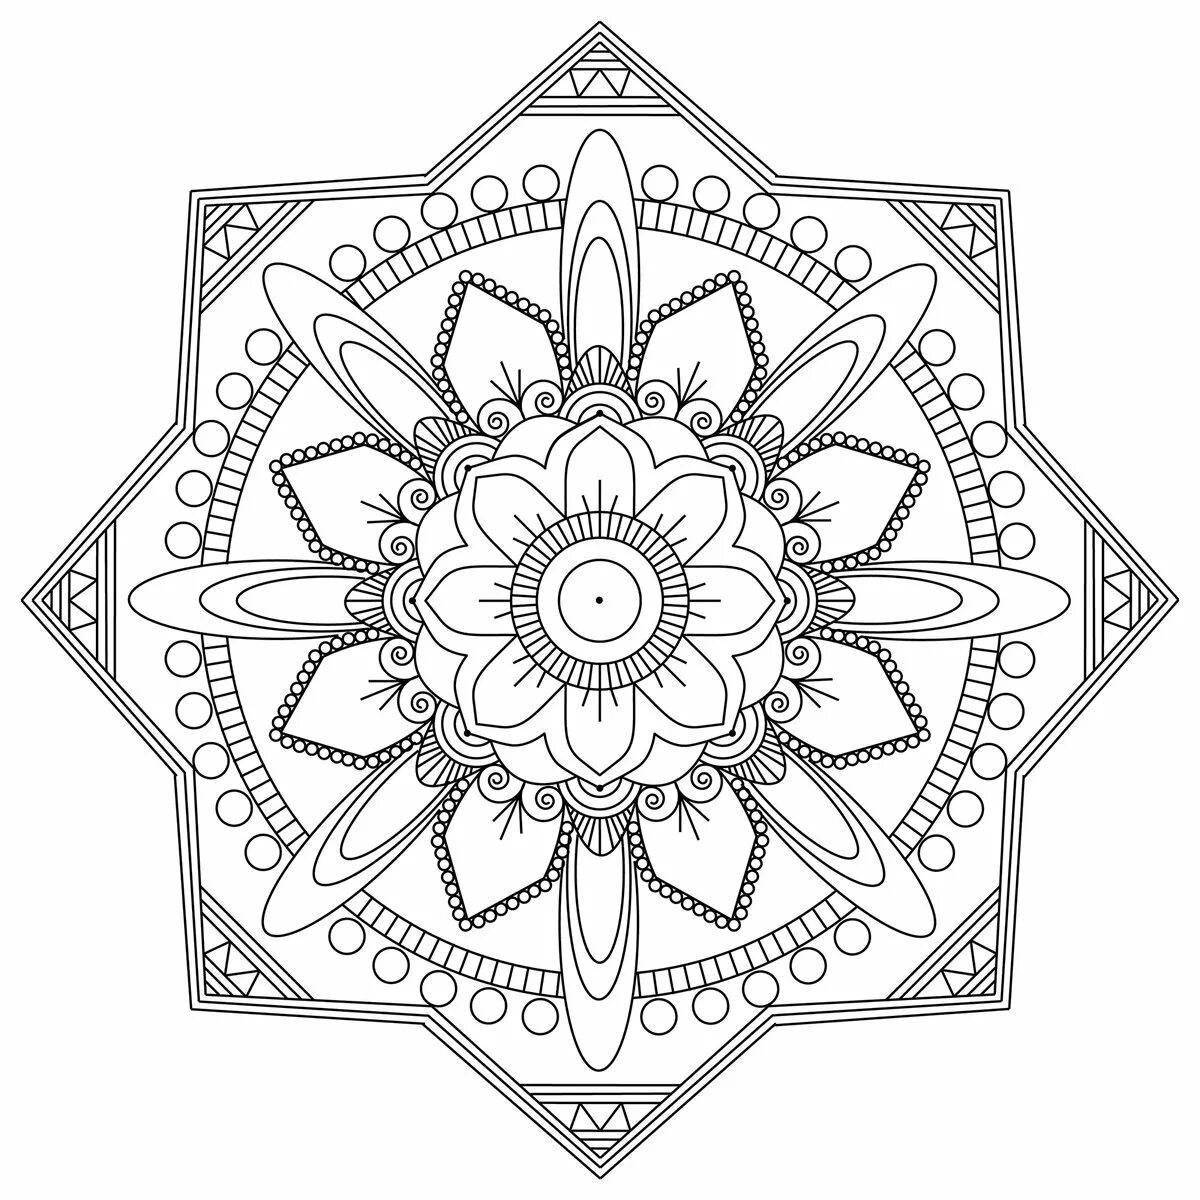 Exquisite coloring mandala for good luck and success